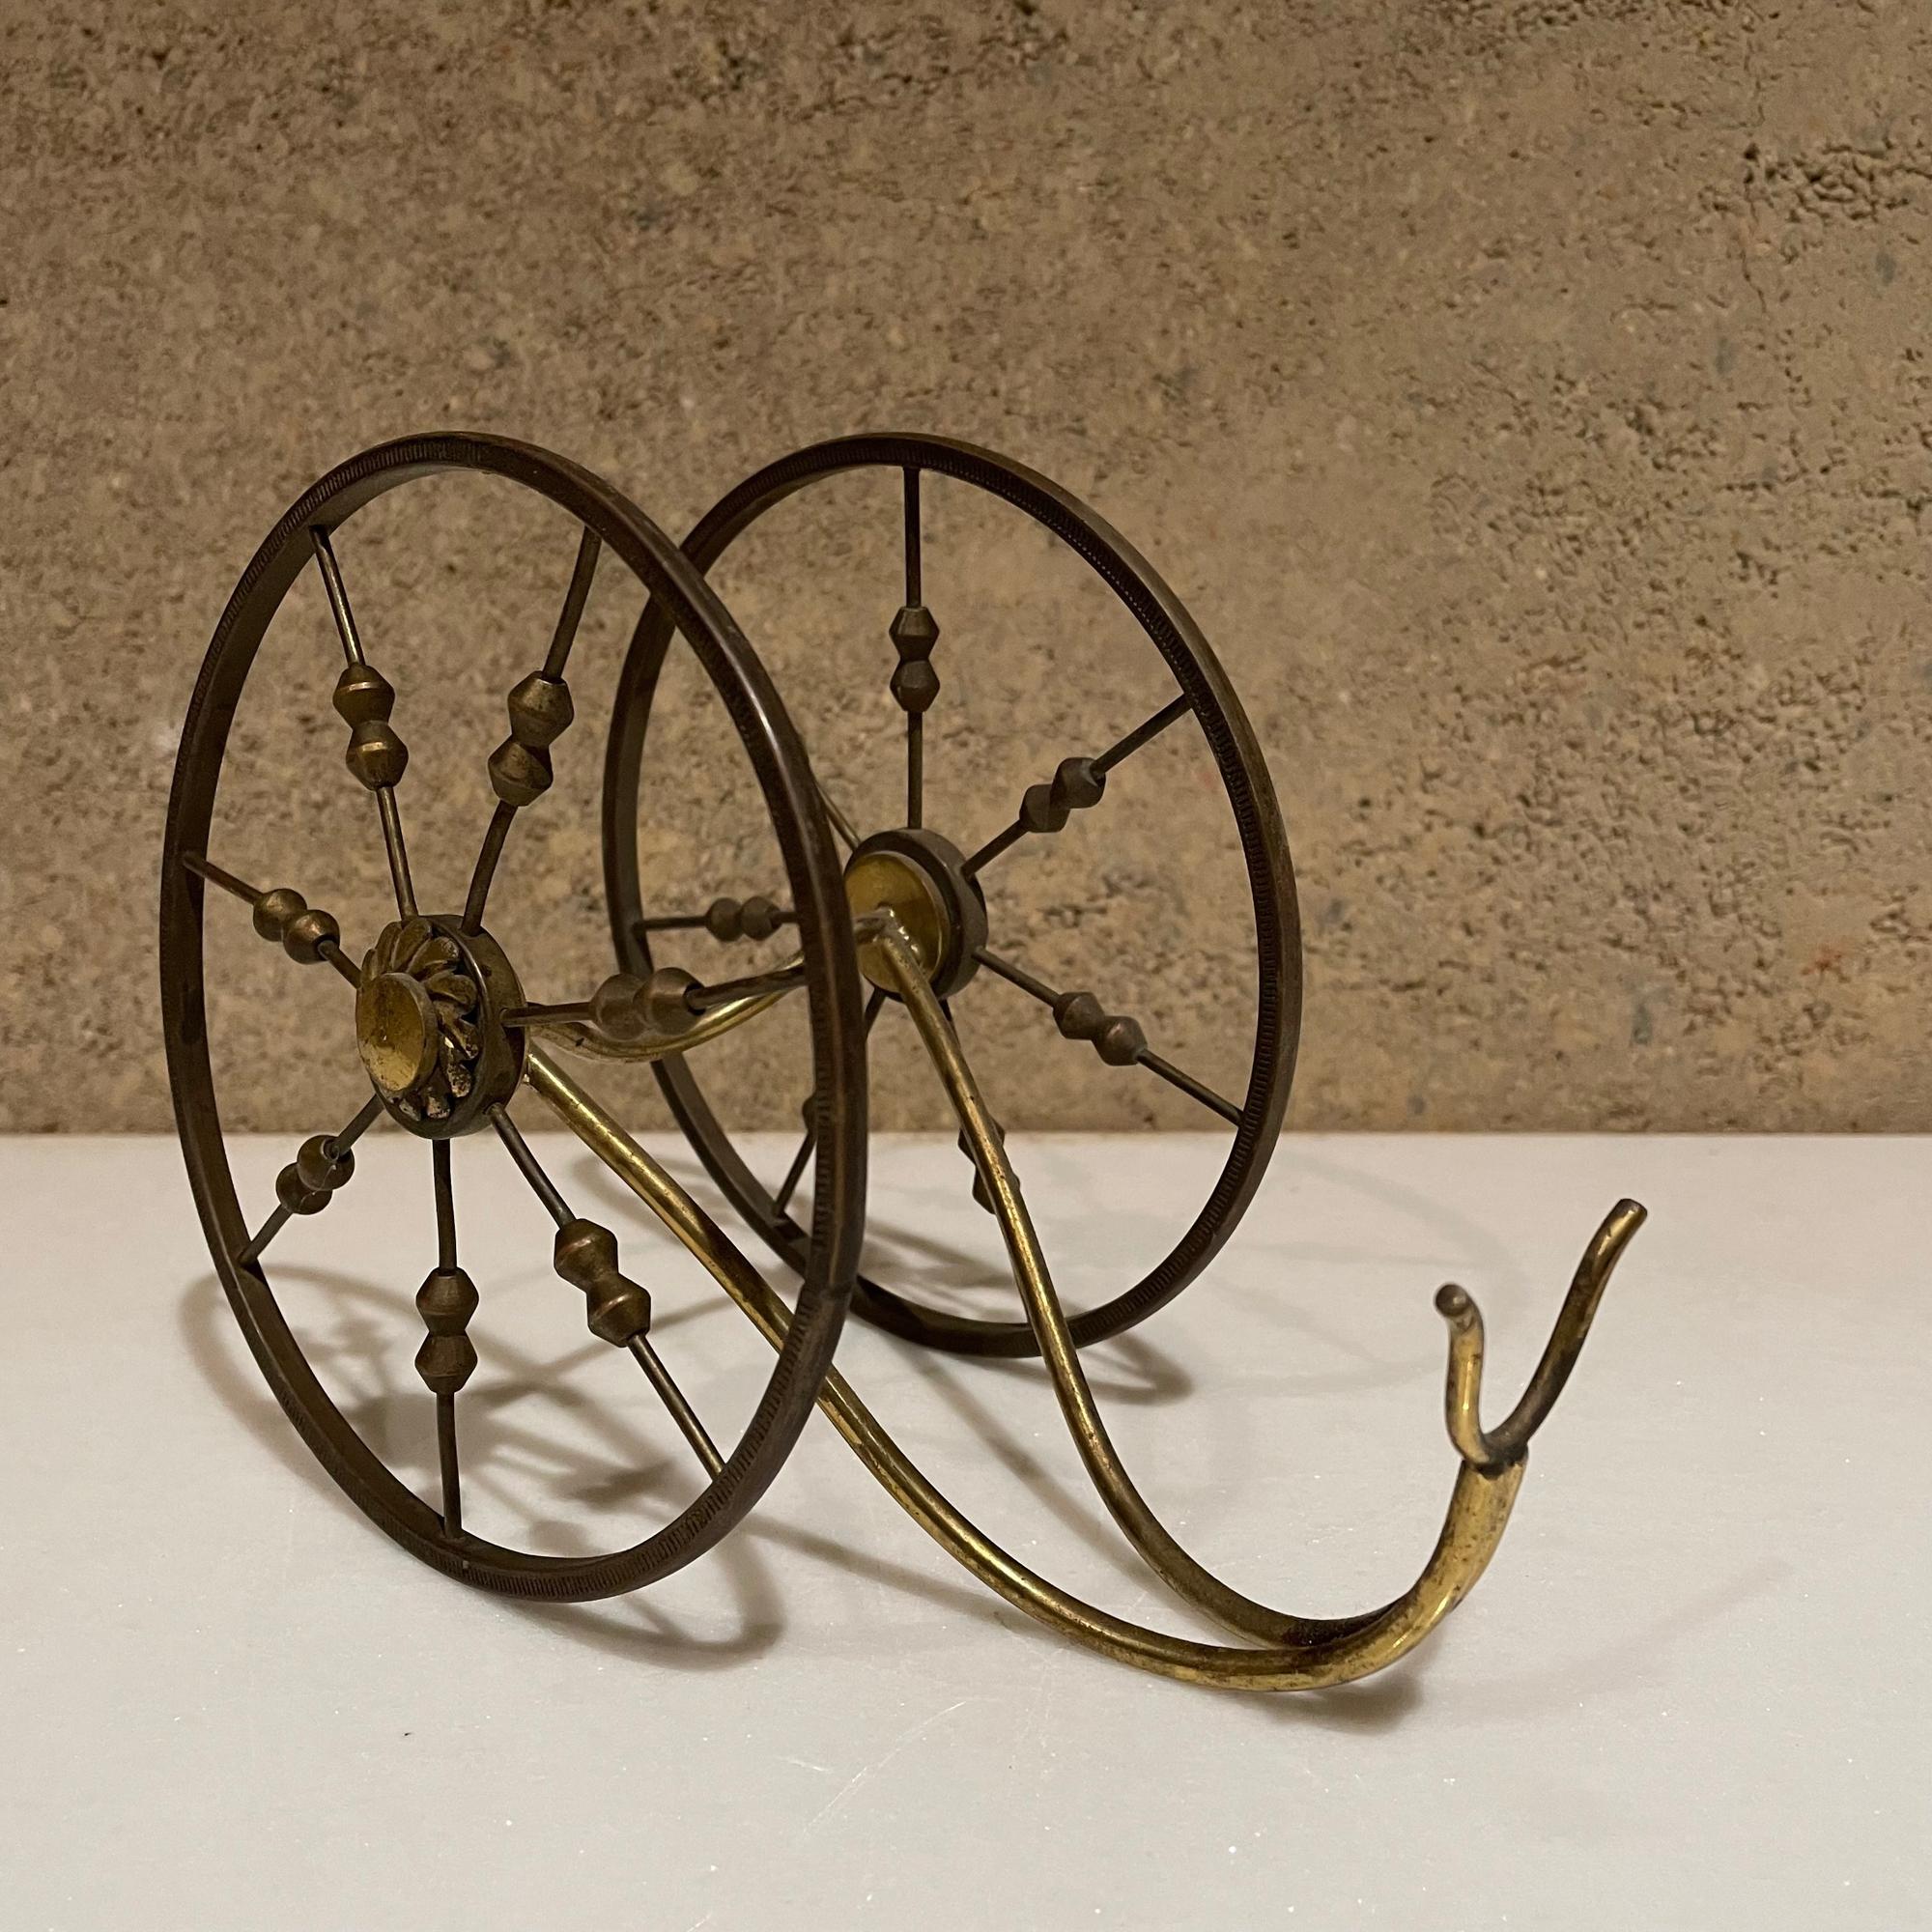 Mid-20th Century 1950s Decorative Wine Bottle Holder Spoke Wheel in Sculptural Brass from Italy  